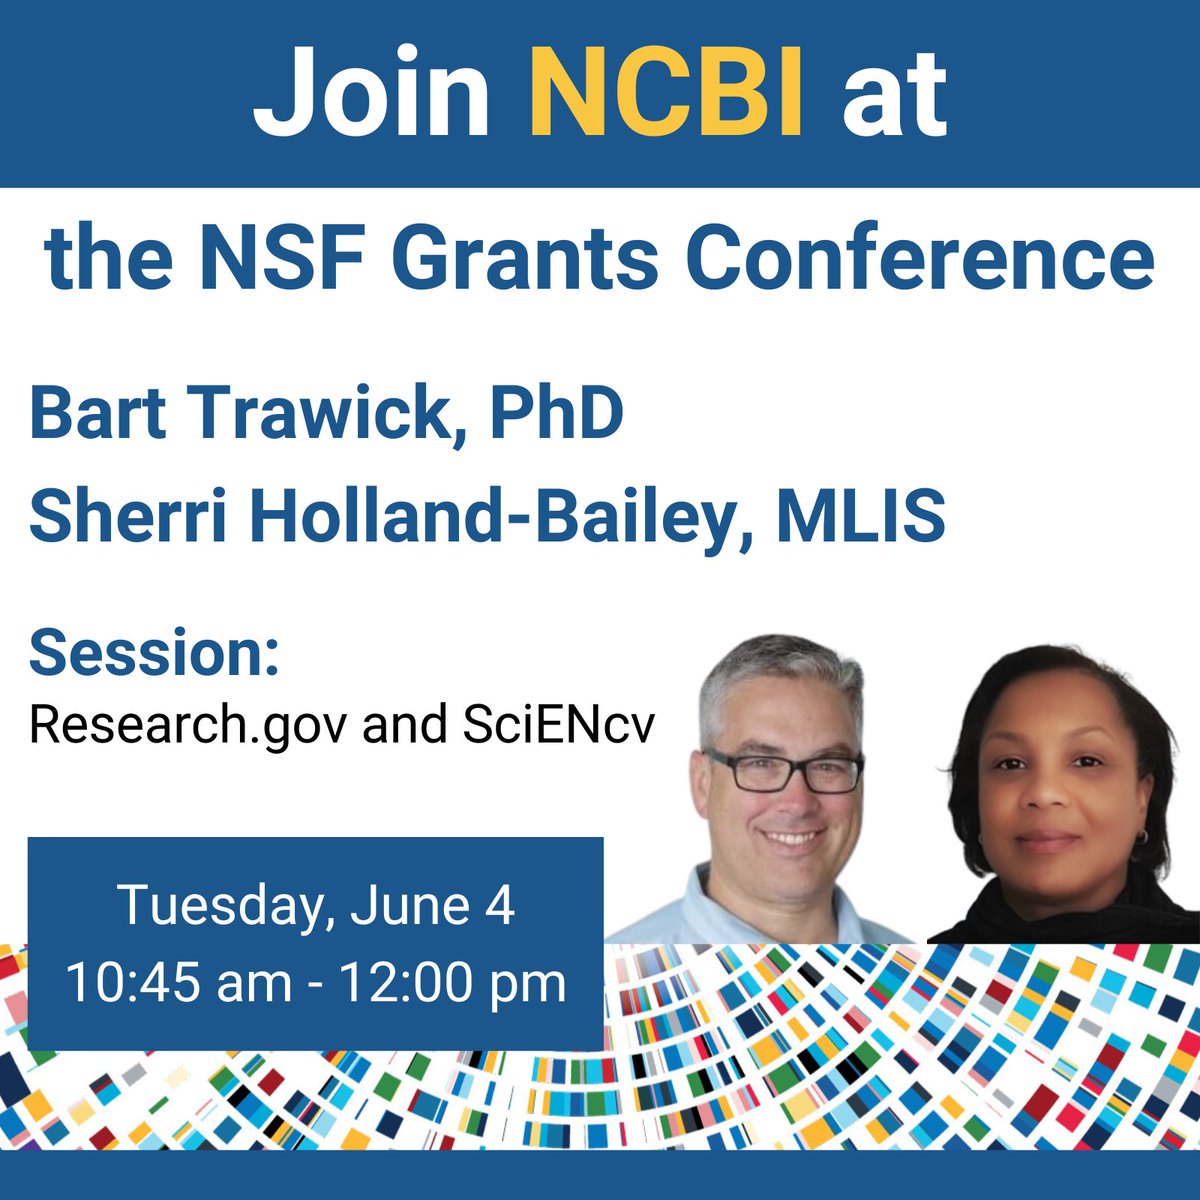 Calling @NSF Grants Conference attendees! Join NCBI's Bart Trawick, PhD, and Sherri Holland-Bailey, MLIS, on Tuesday, June 4, 10:45 am - 12:00 pm ET for the Research.gov and SciENcv Session. More info: ow.ly/Inxe50Rv5LF